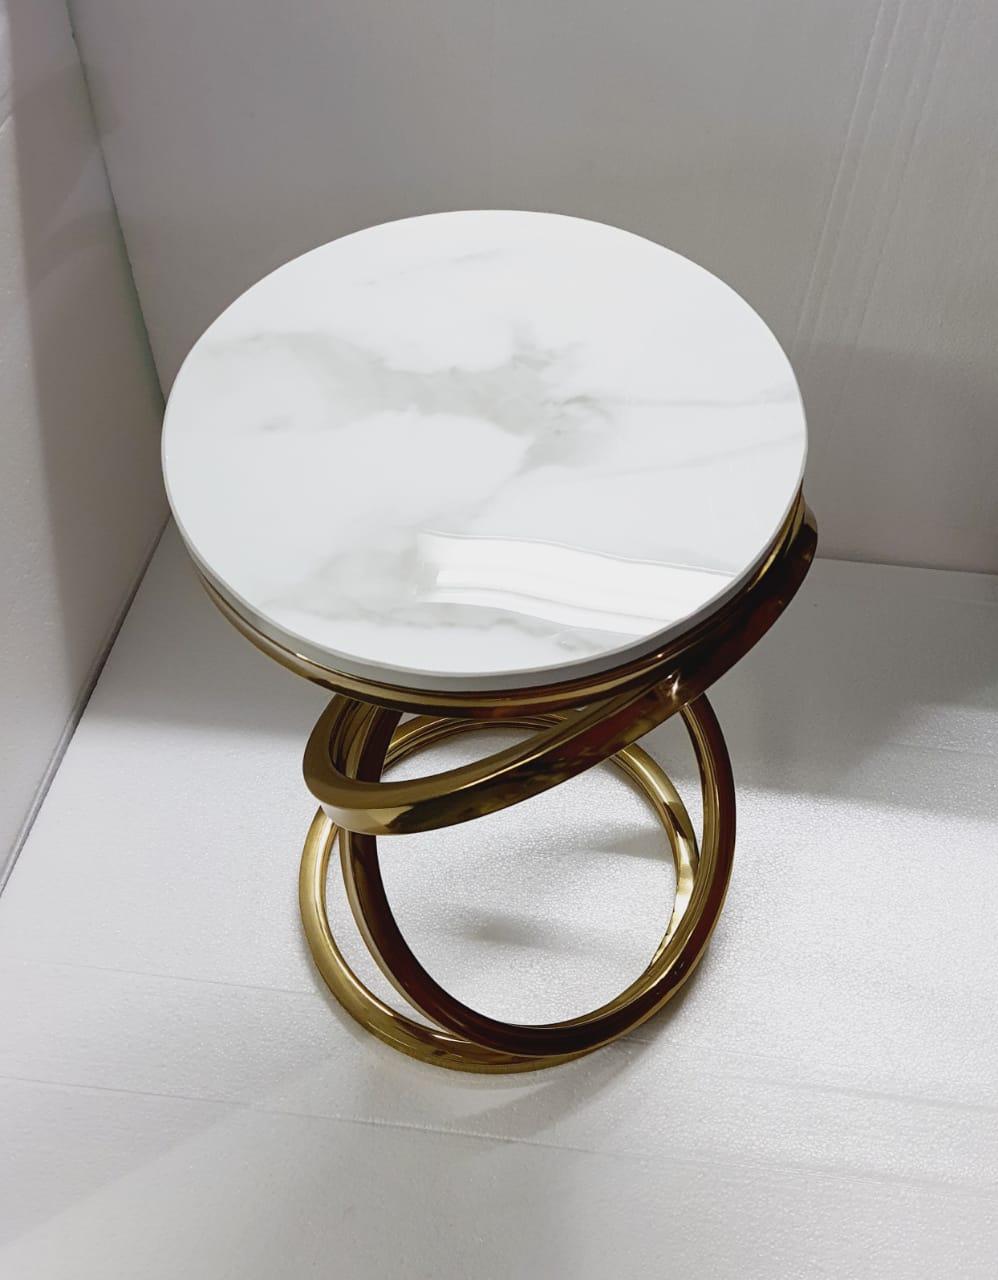 PC Home Decor | Stainless Steel Rings Side Table with Marble Top, Gold and White